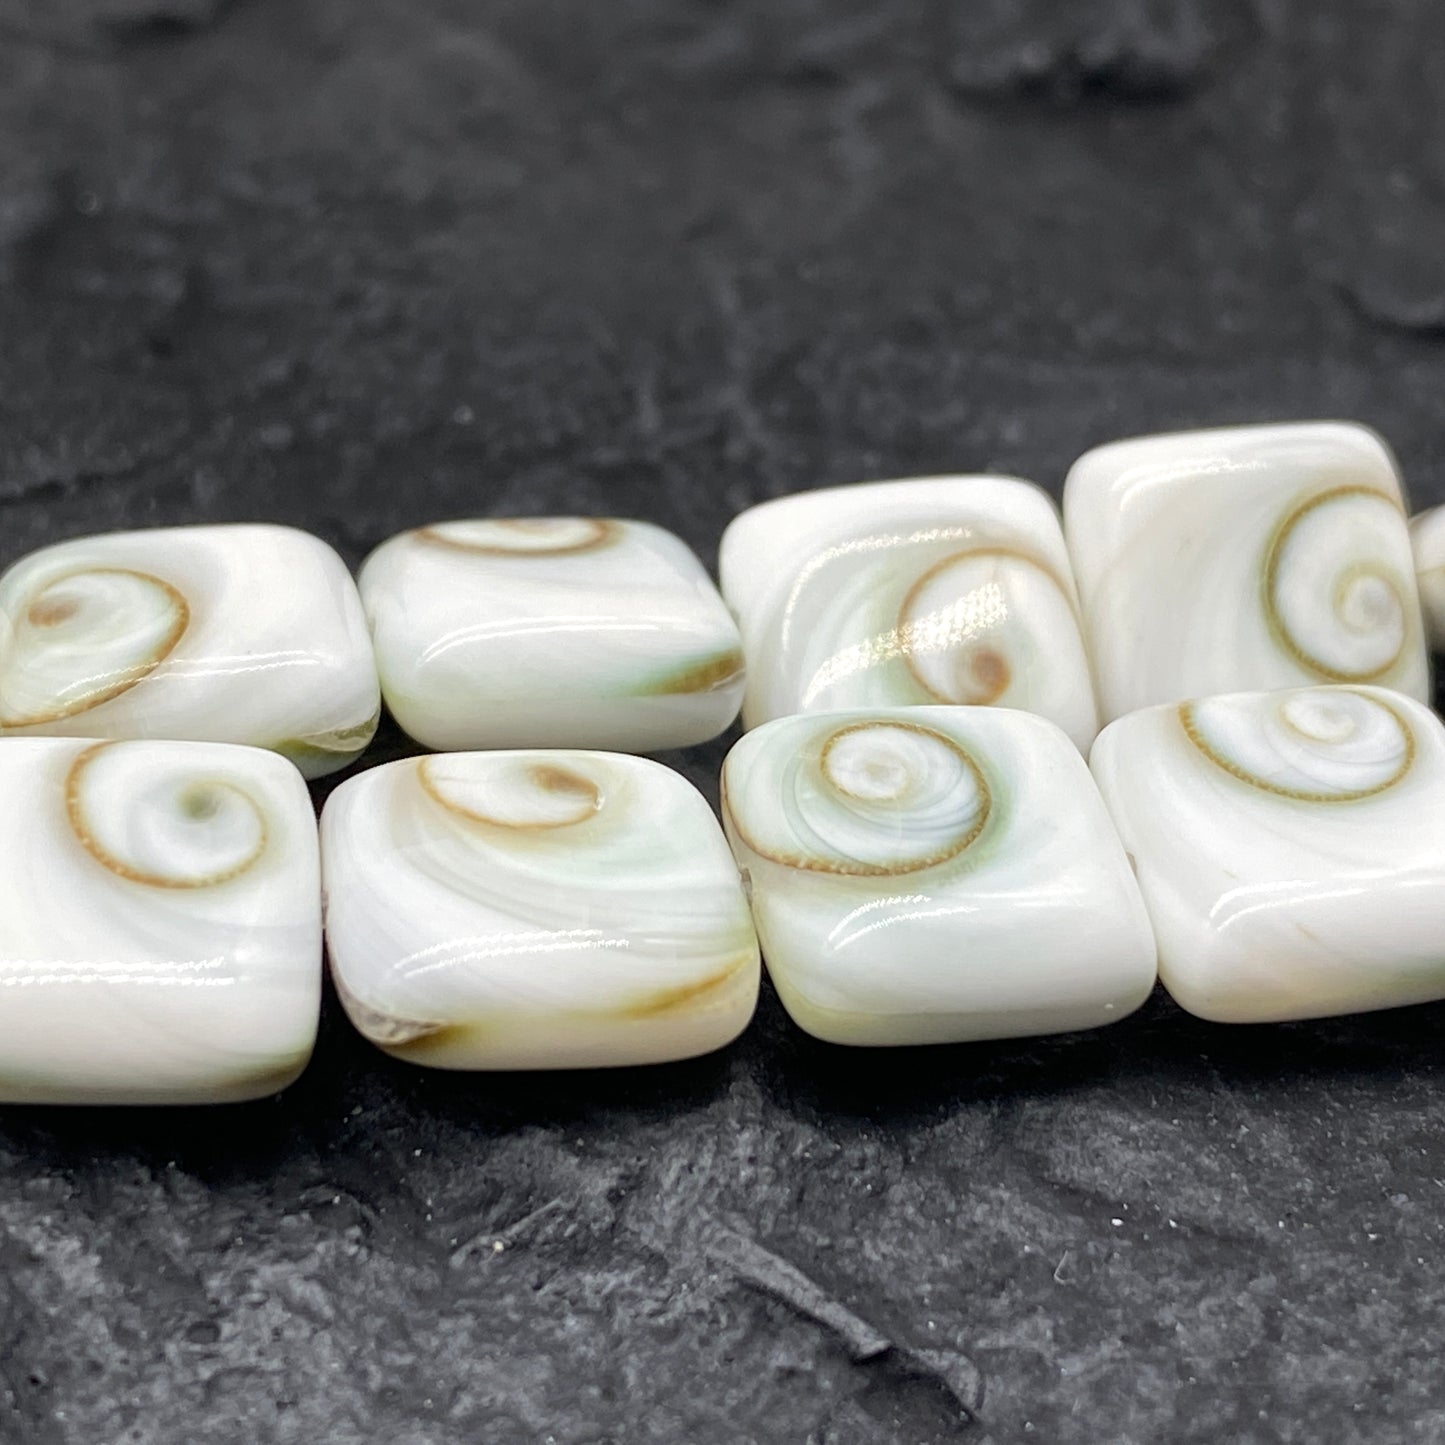 Pearly-White Indonesian Shiva Eye Shell Beads (Doublet- Two Shells in One Bead) Chakra Yin-Yang Double-Energy DIY Jewelry Making Smooth Square Shape